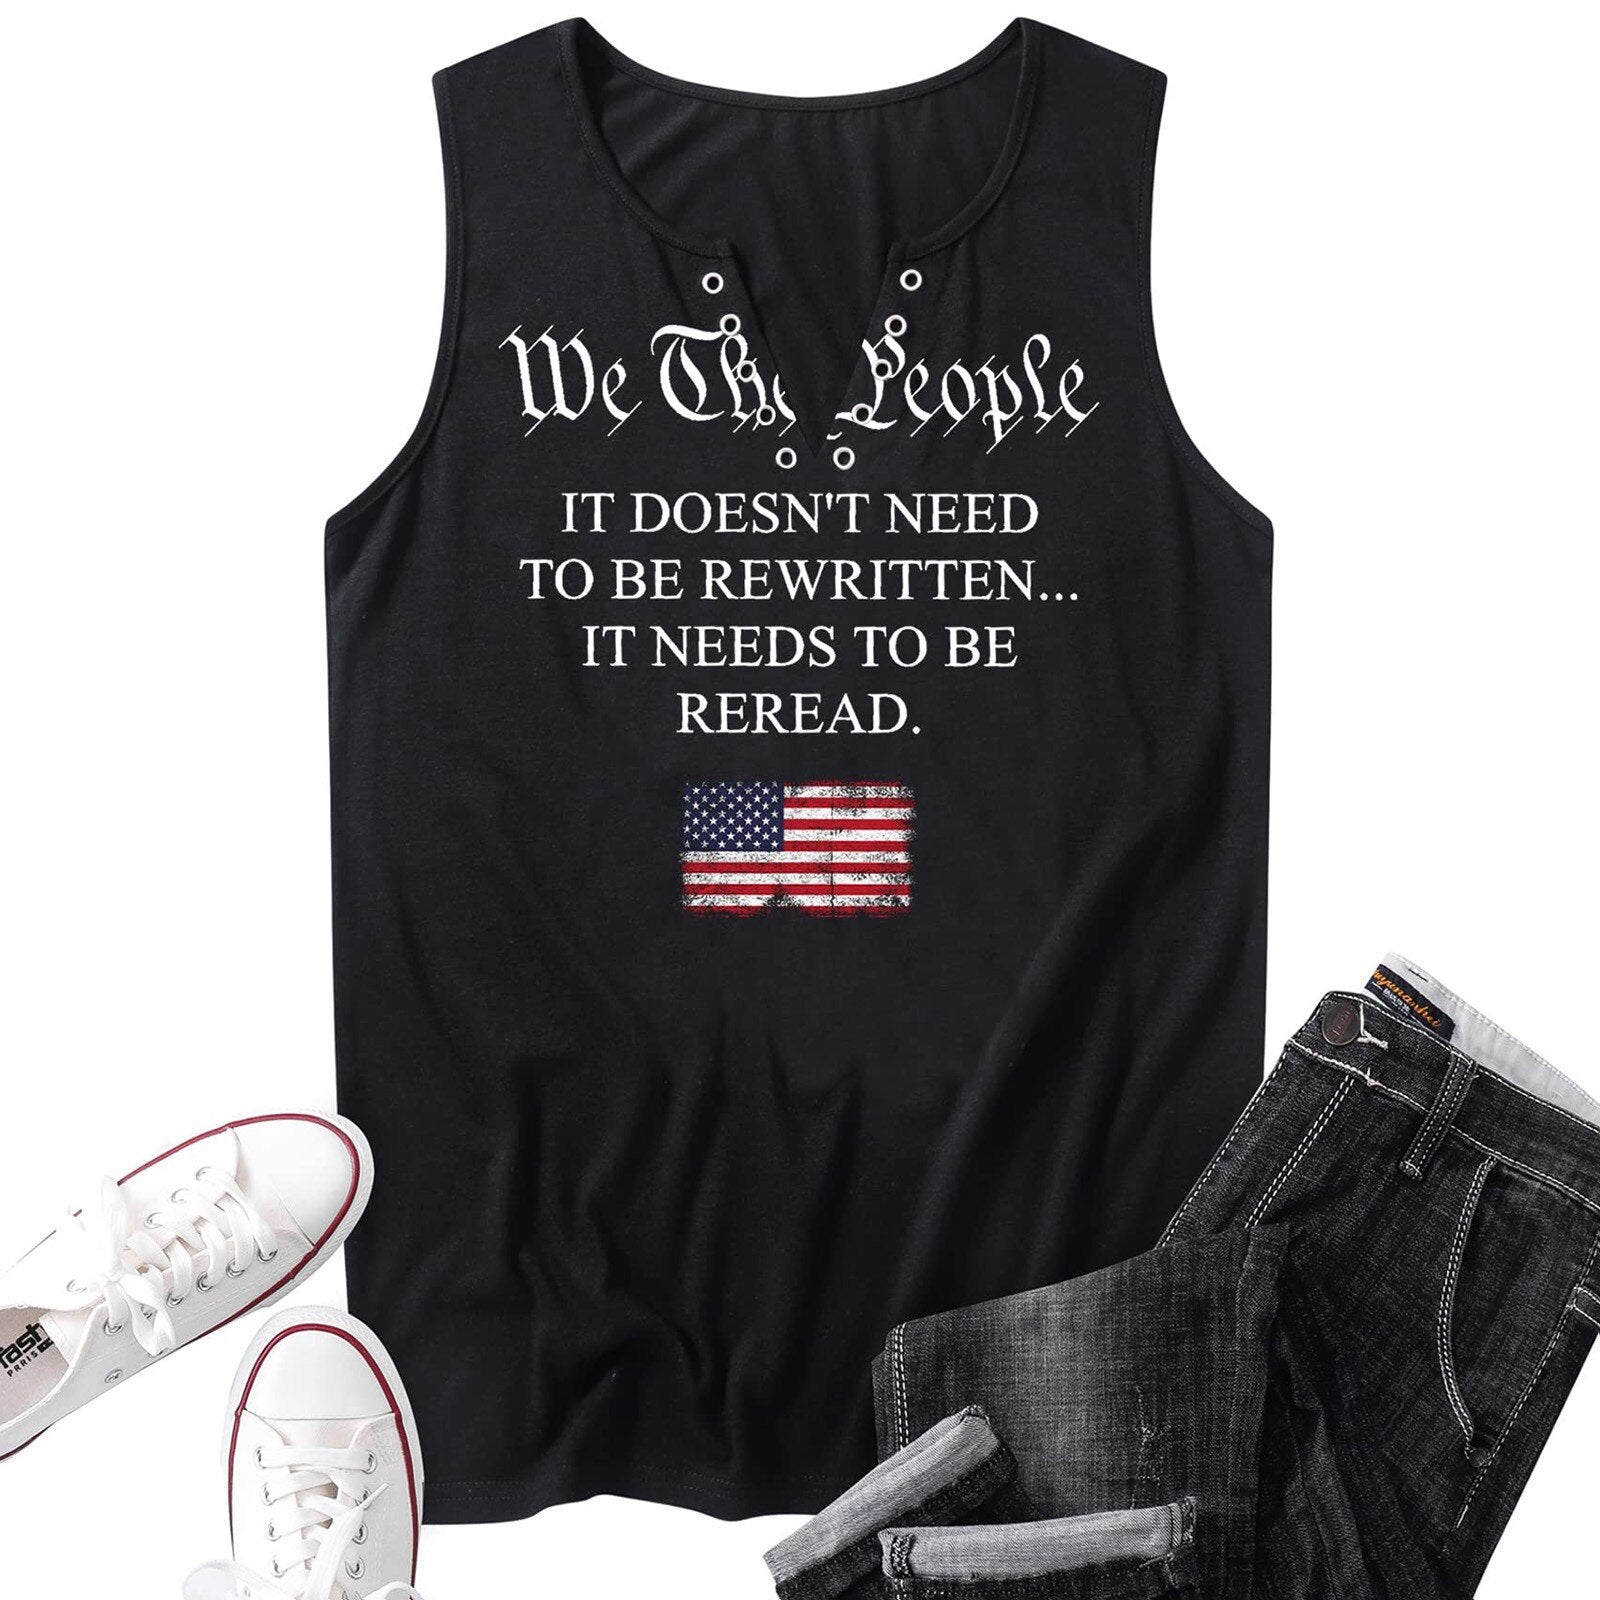 American Flag Tank Tops For Women 4th Of July Shirts Ring Hole Sleeveless V Neck T Shirt Top Patriotic Tees Vetements Femme Ete